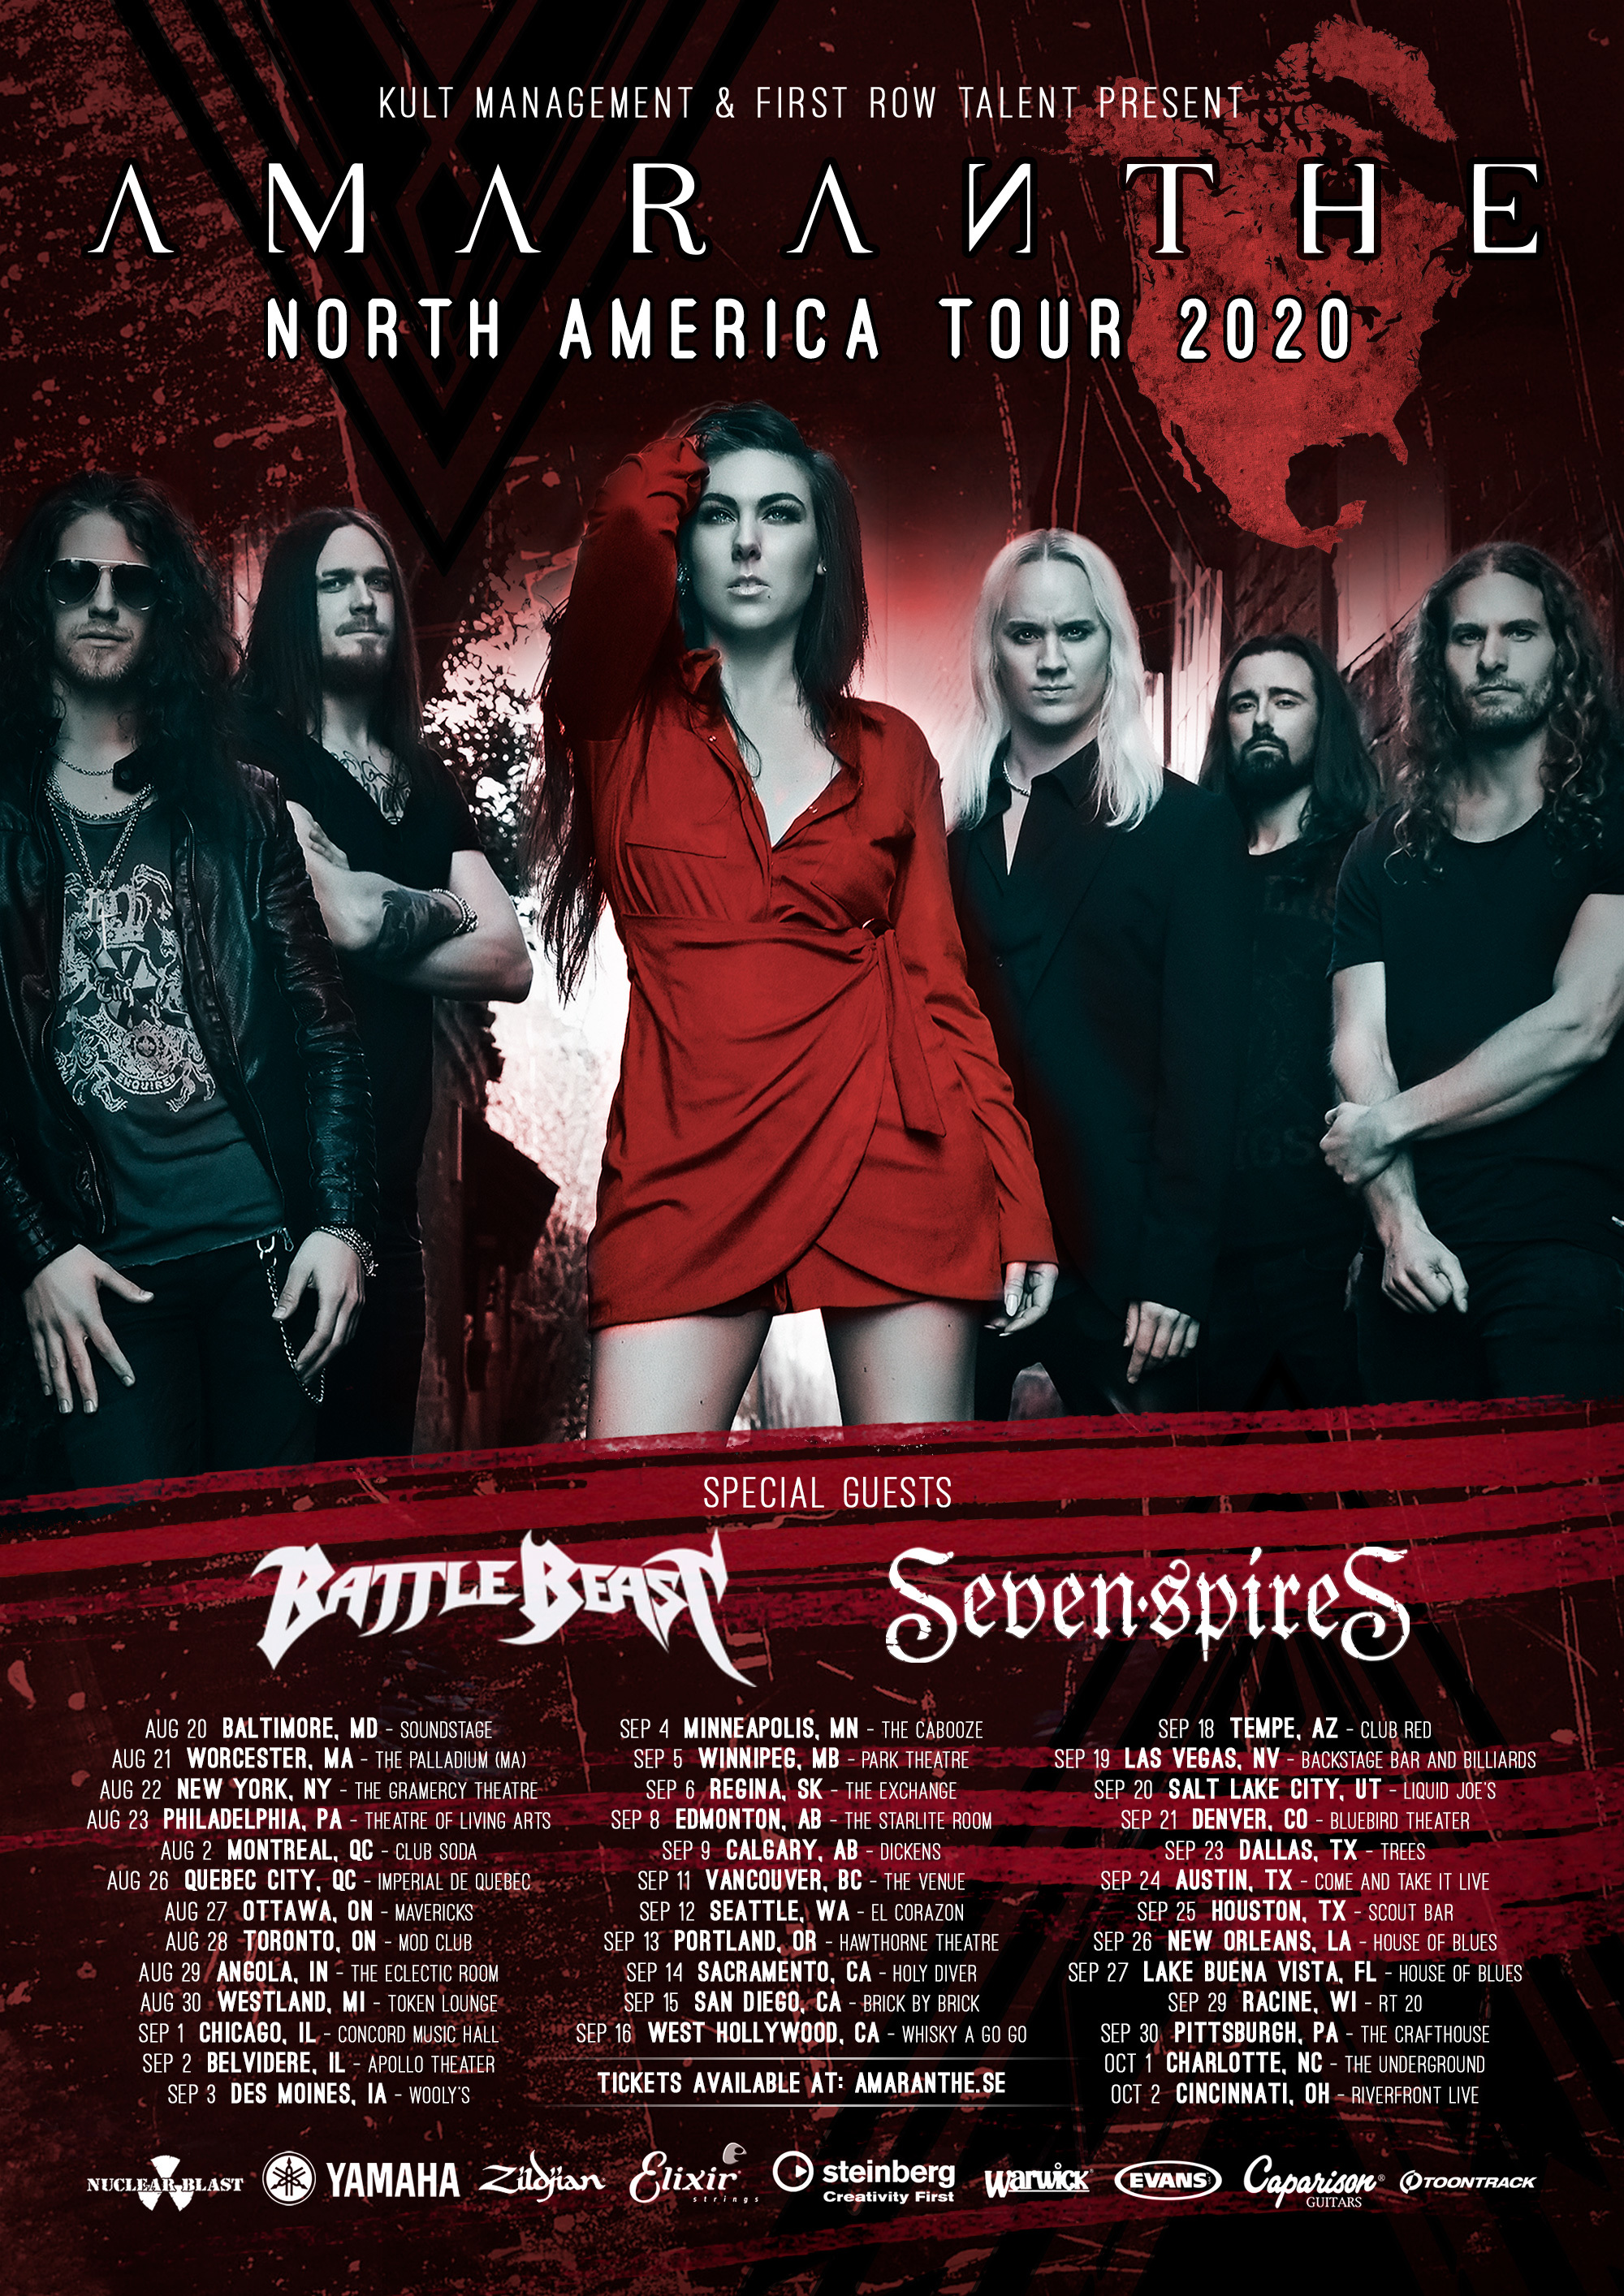 AMARANTHE | Announce North American Tour 2020 With Special Guests BATTLE BEAST and SEVEN SPIRES!